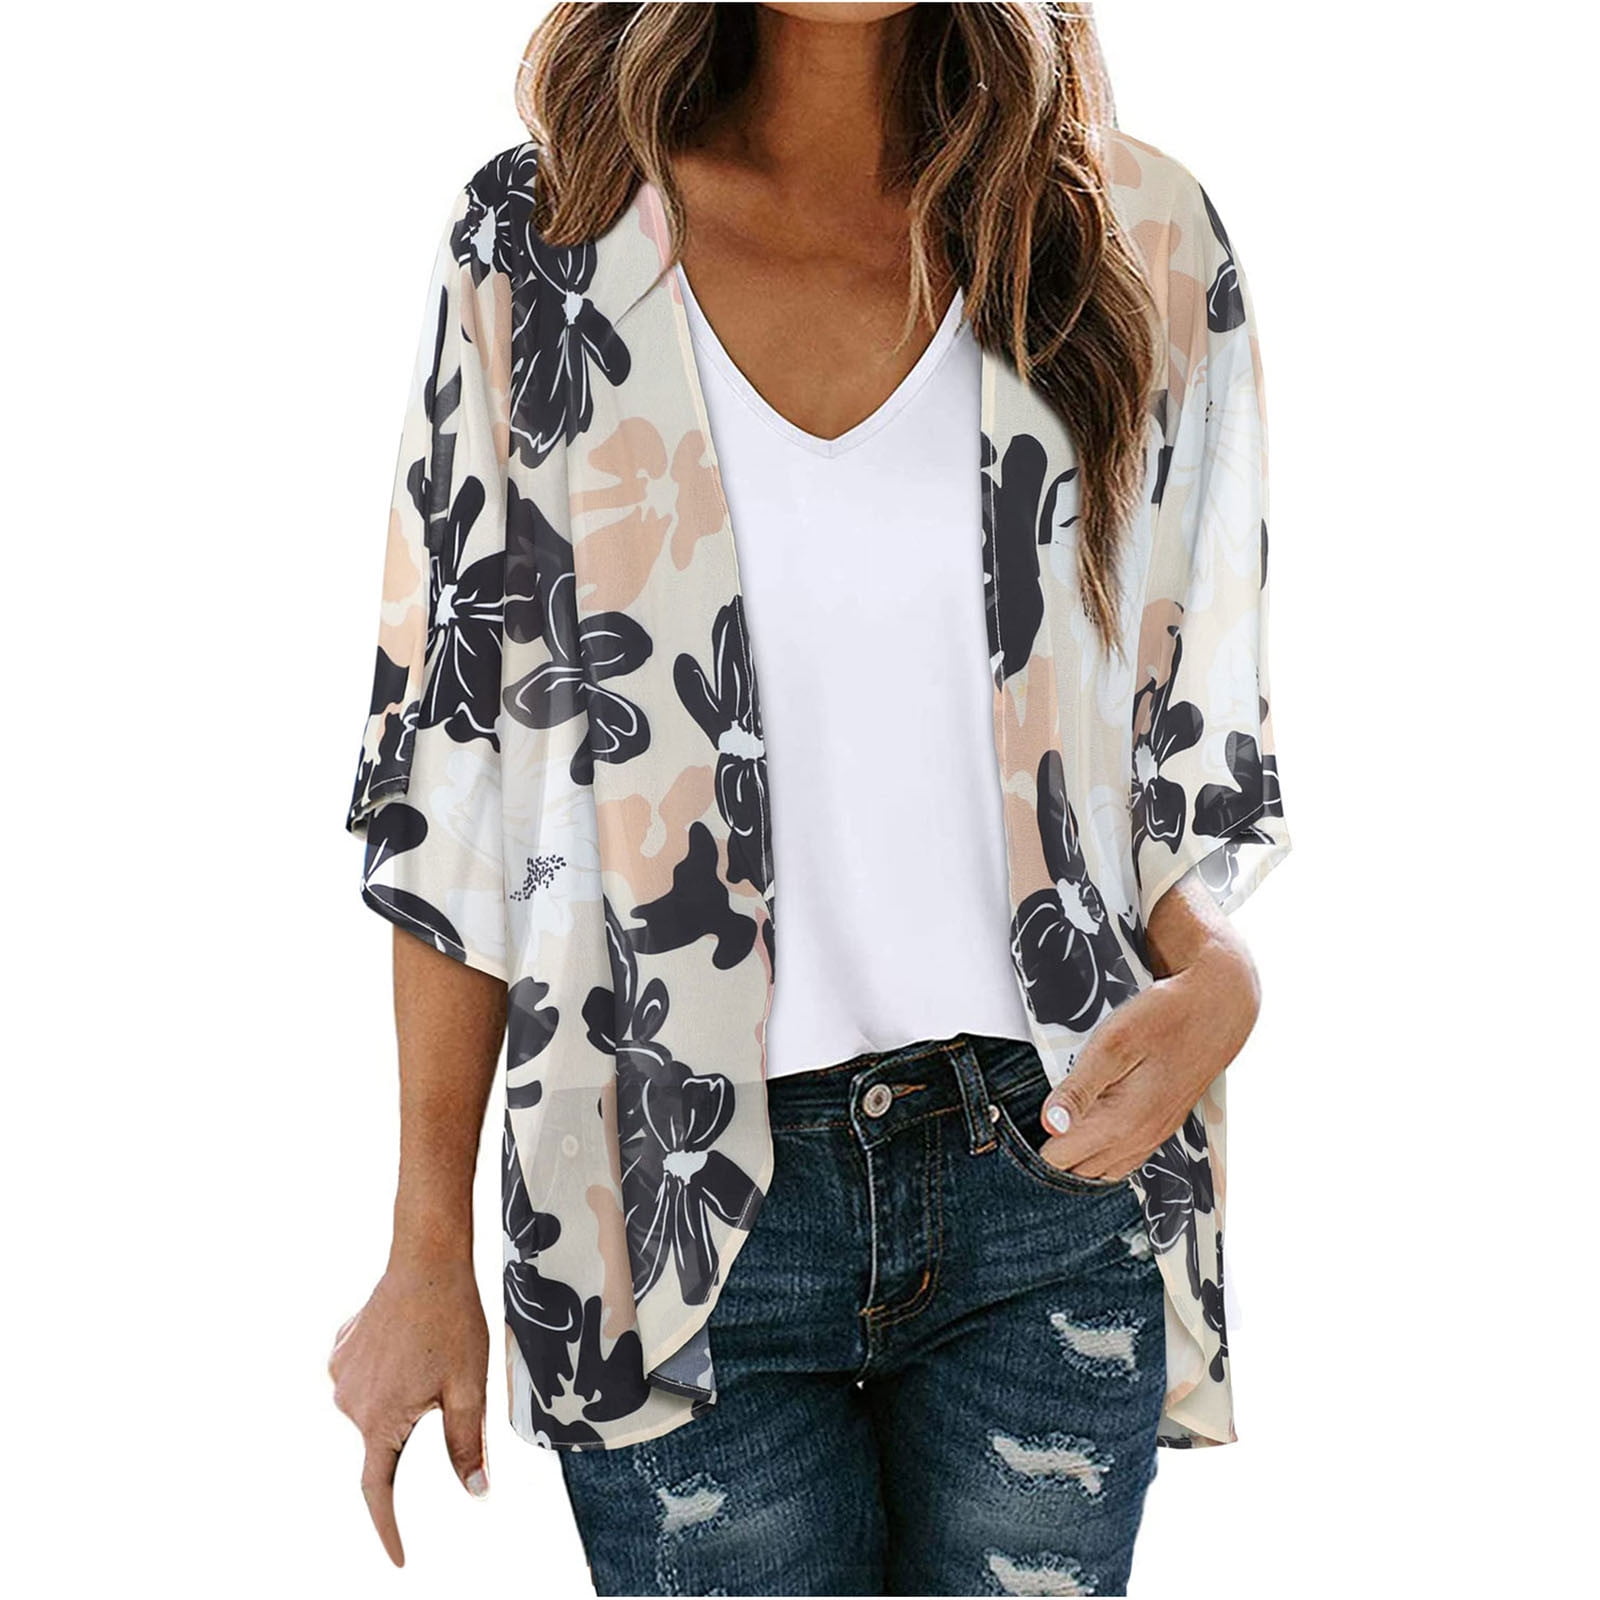 Is the kimono your new casual jacket?